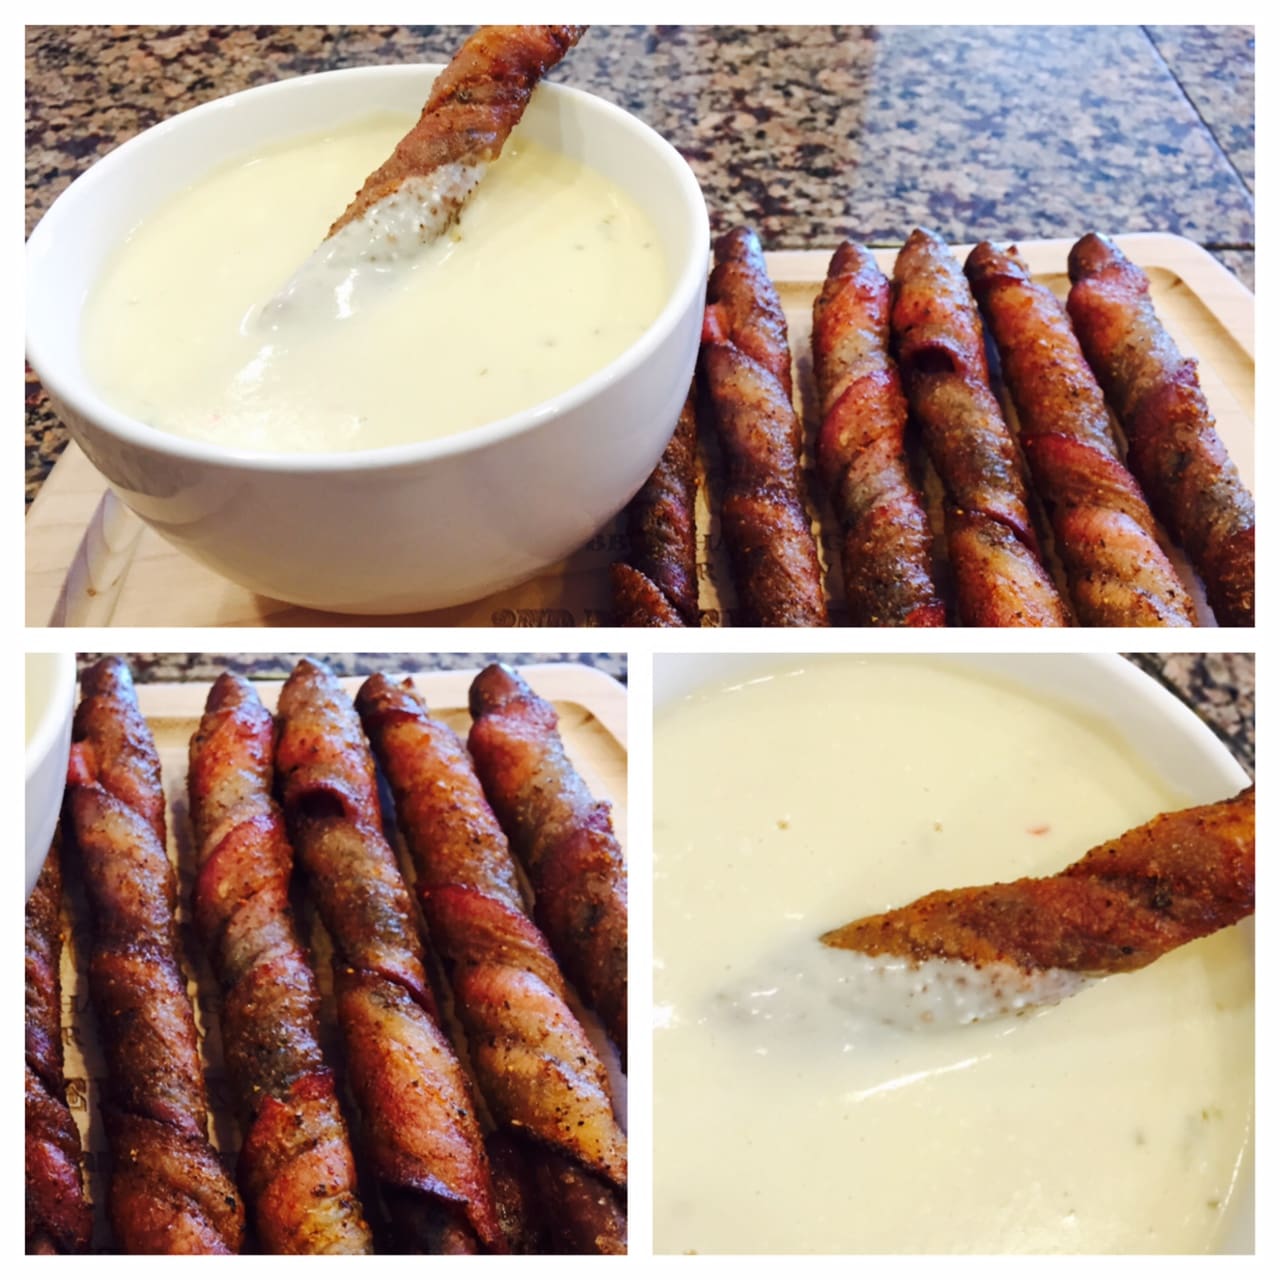 Bacon Wrapped Pretzels with Craft Beer Cheese Dip – Awesome Tailgate Food